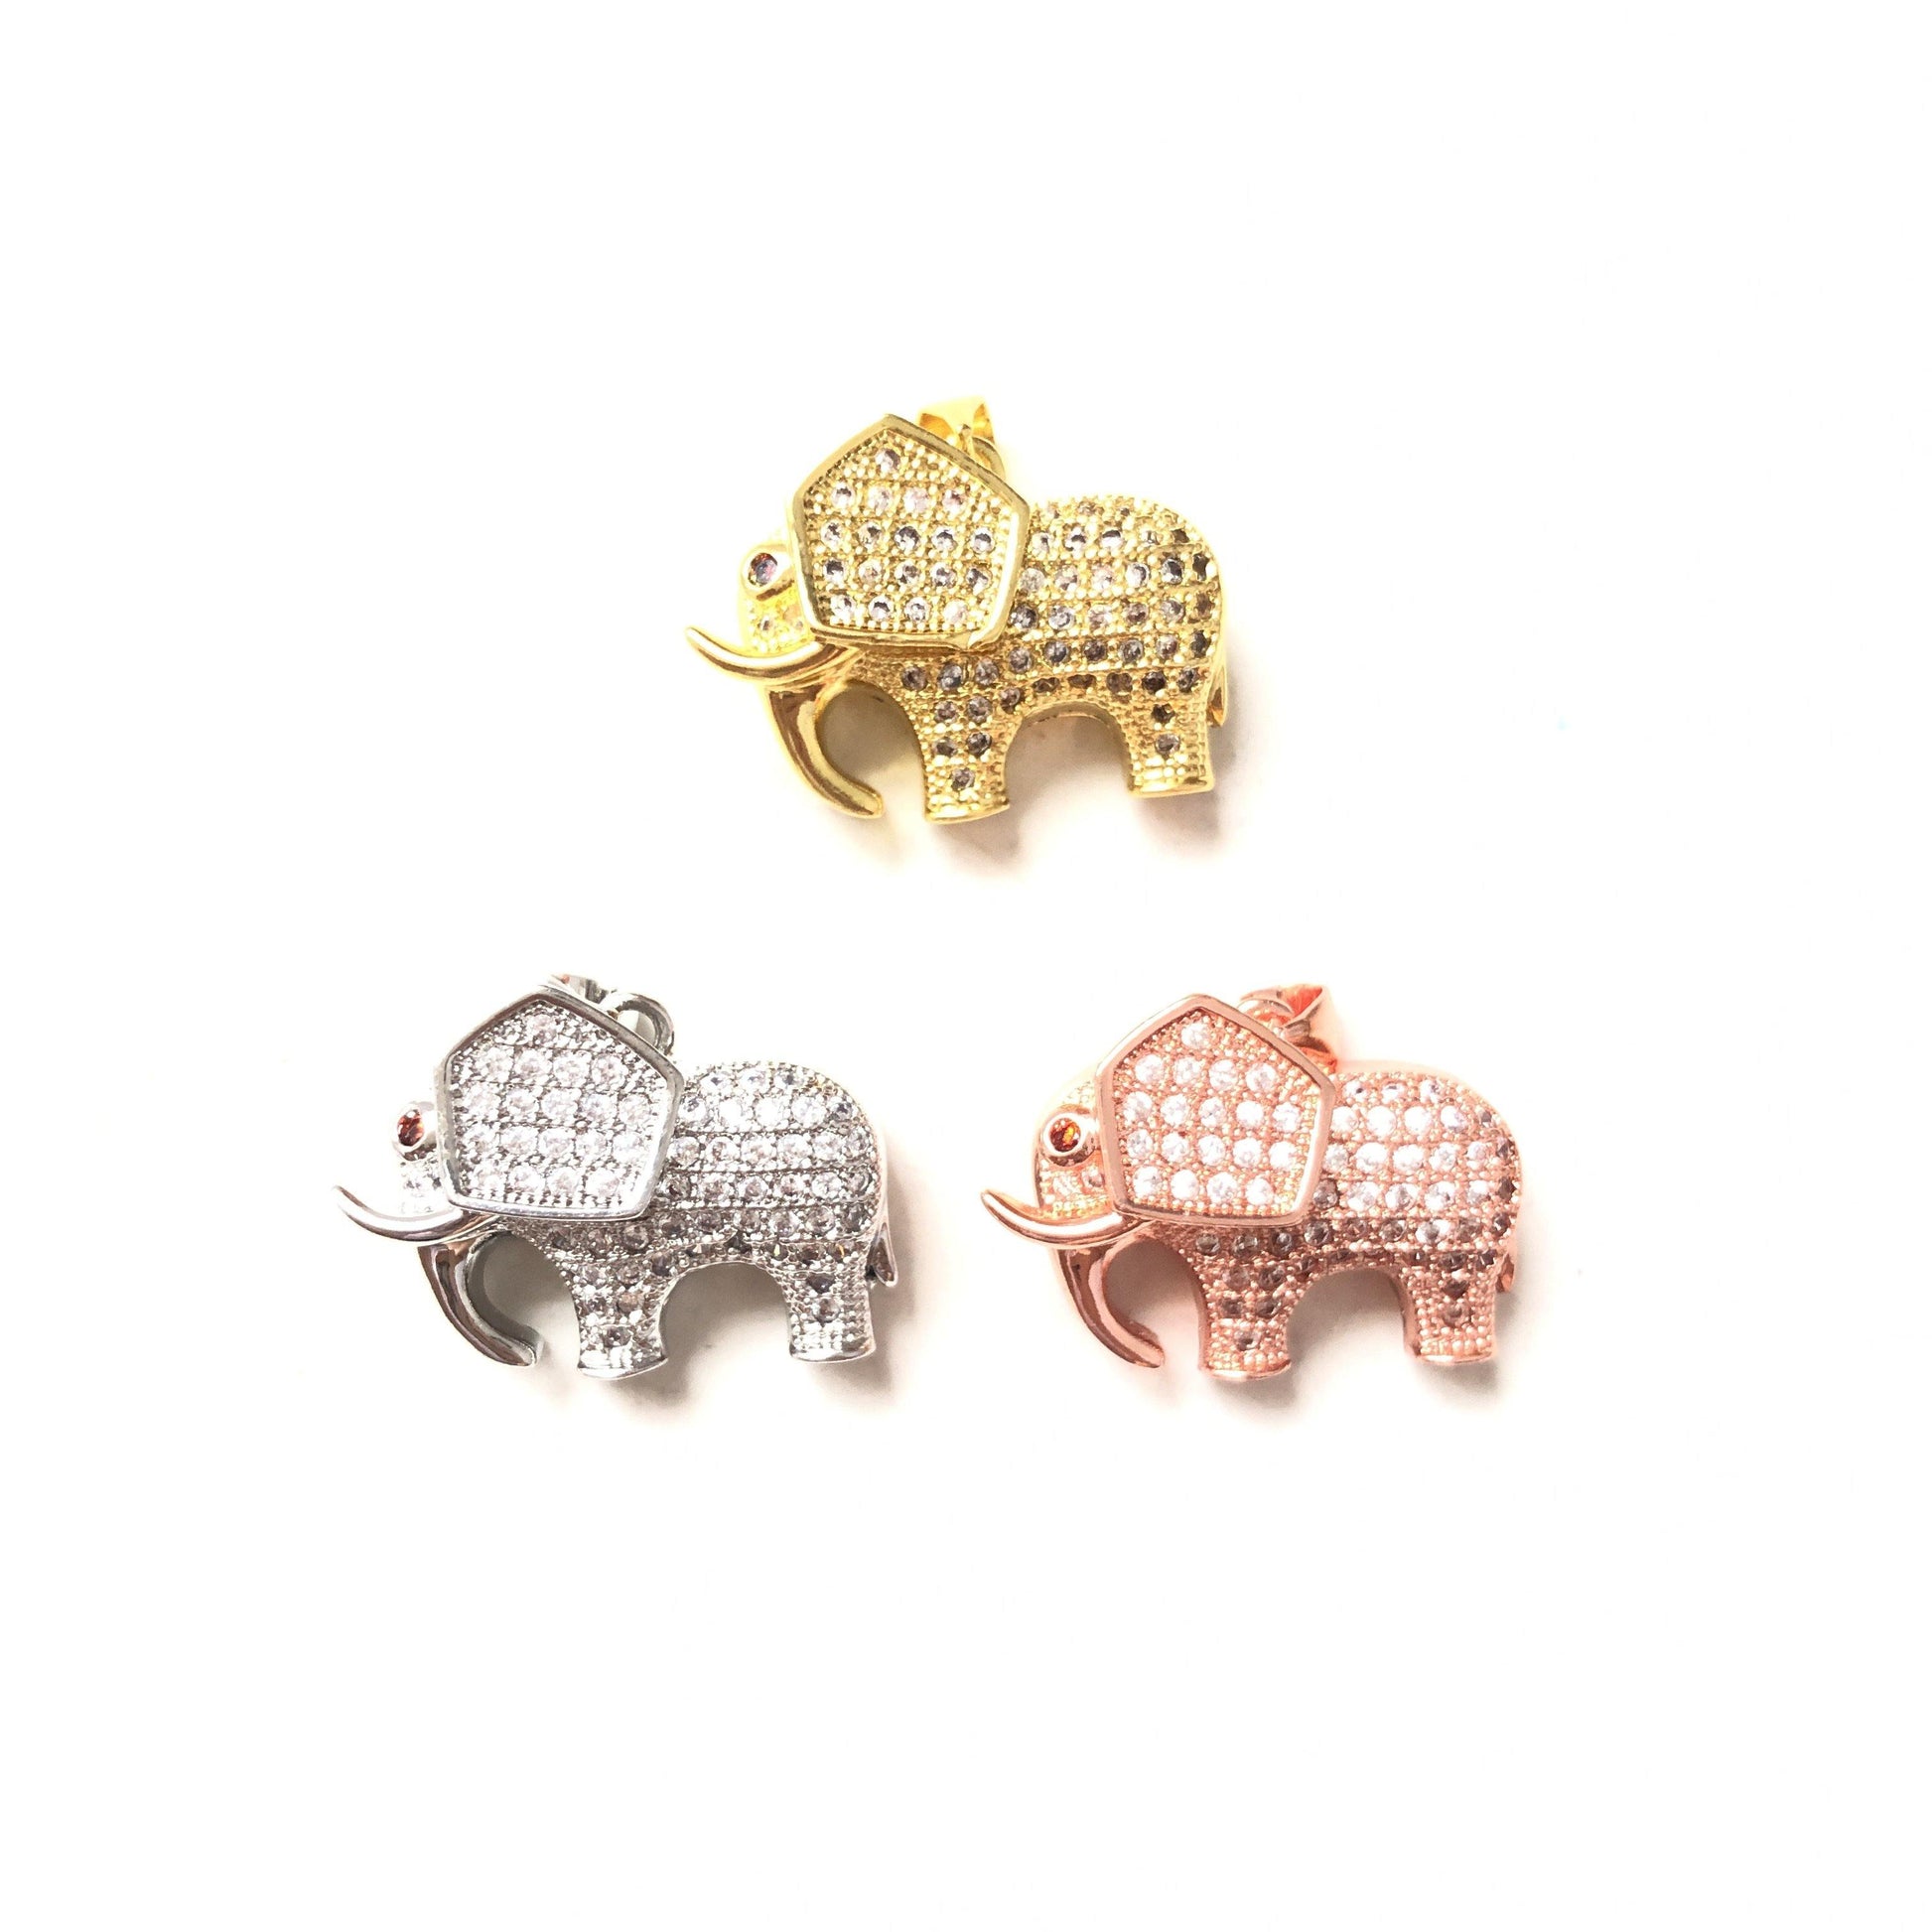 10pcs/lot 22*17mm CZ Paved Elephant Charms CZ Paved Charms Animals & Insects Charms Beads Beyond